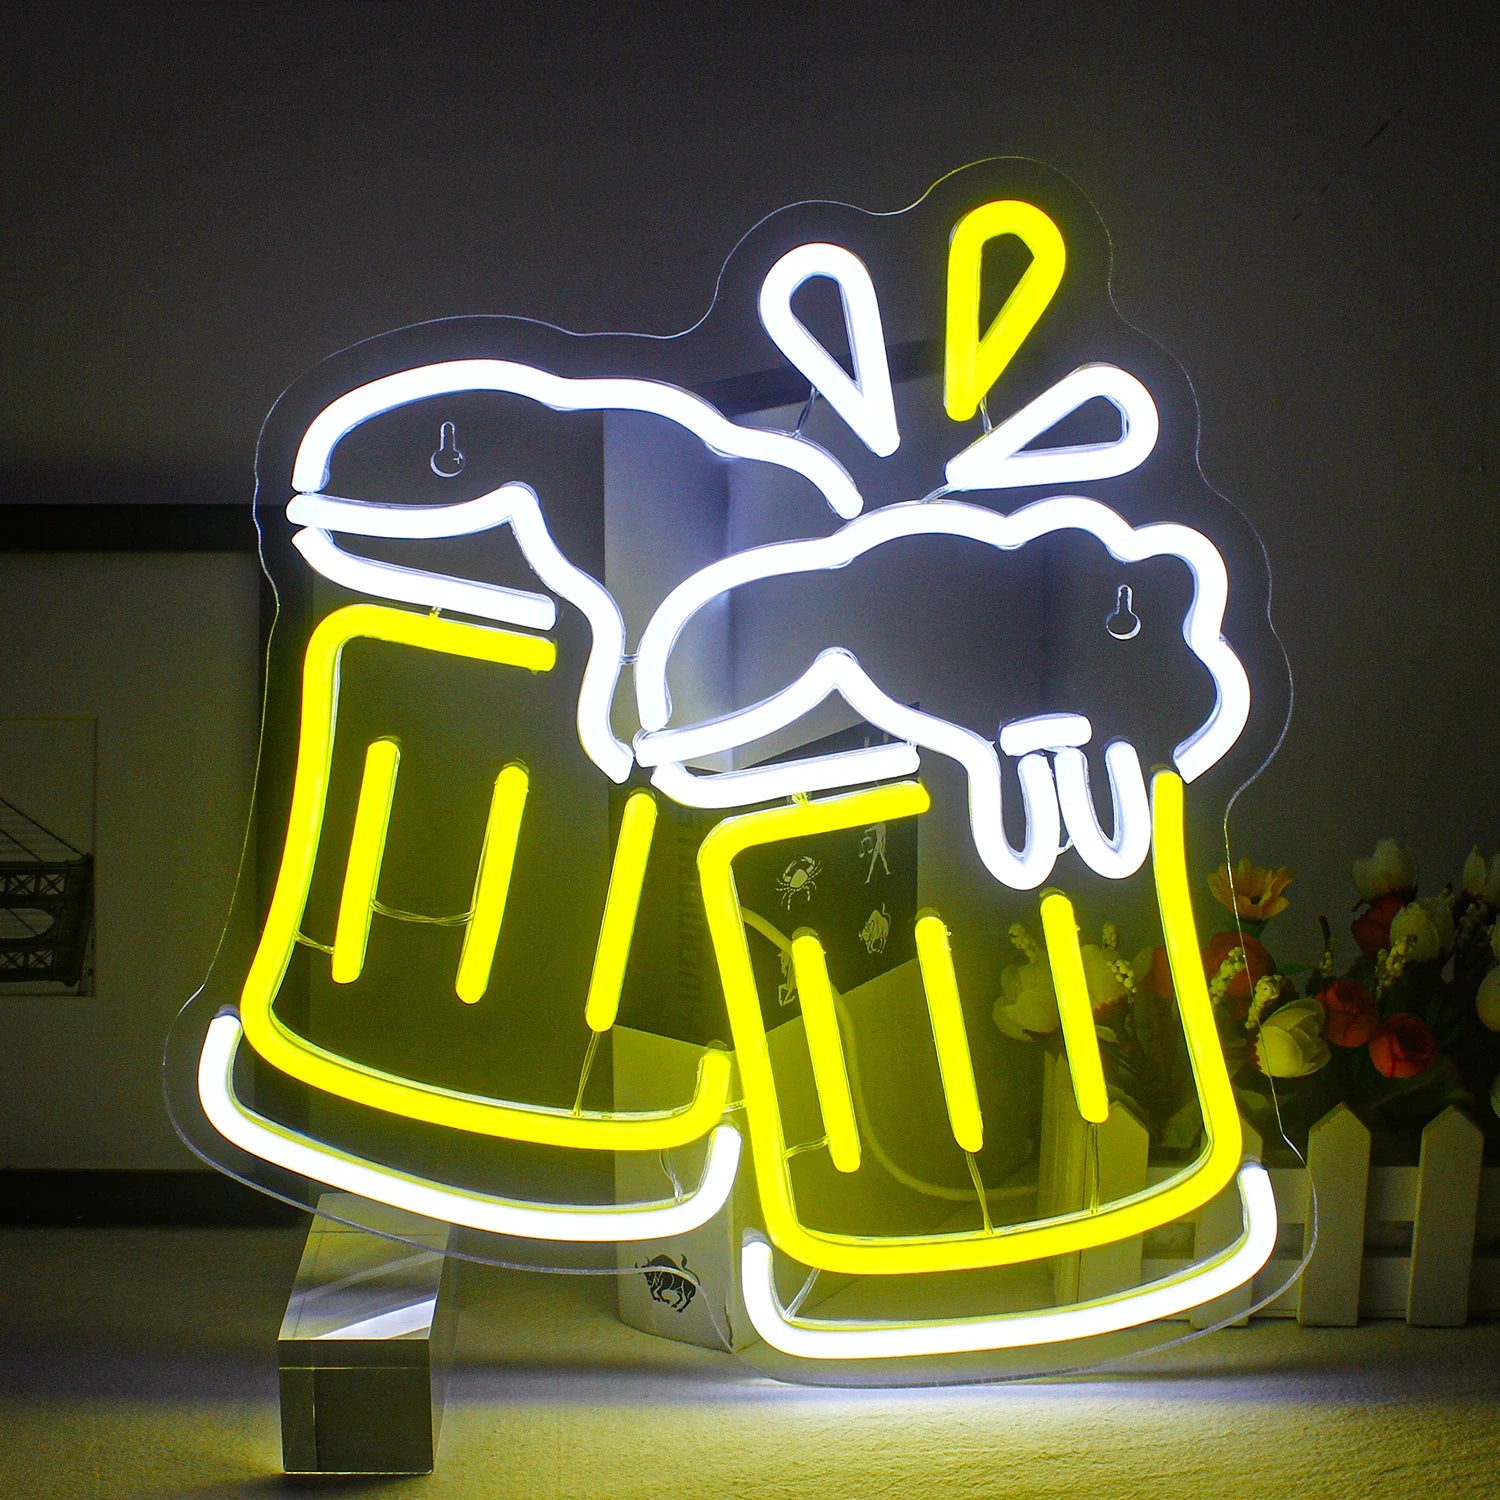 Beer Cheers Neon Sign Led Sign for Wall Decor Beer Man Cave Bar Home Pub Party Club Restaurant Shop Sign Bar Lights Wall Decor